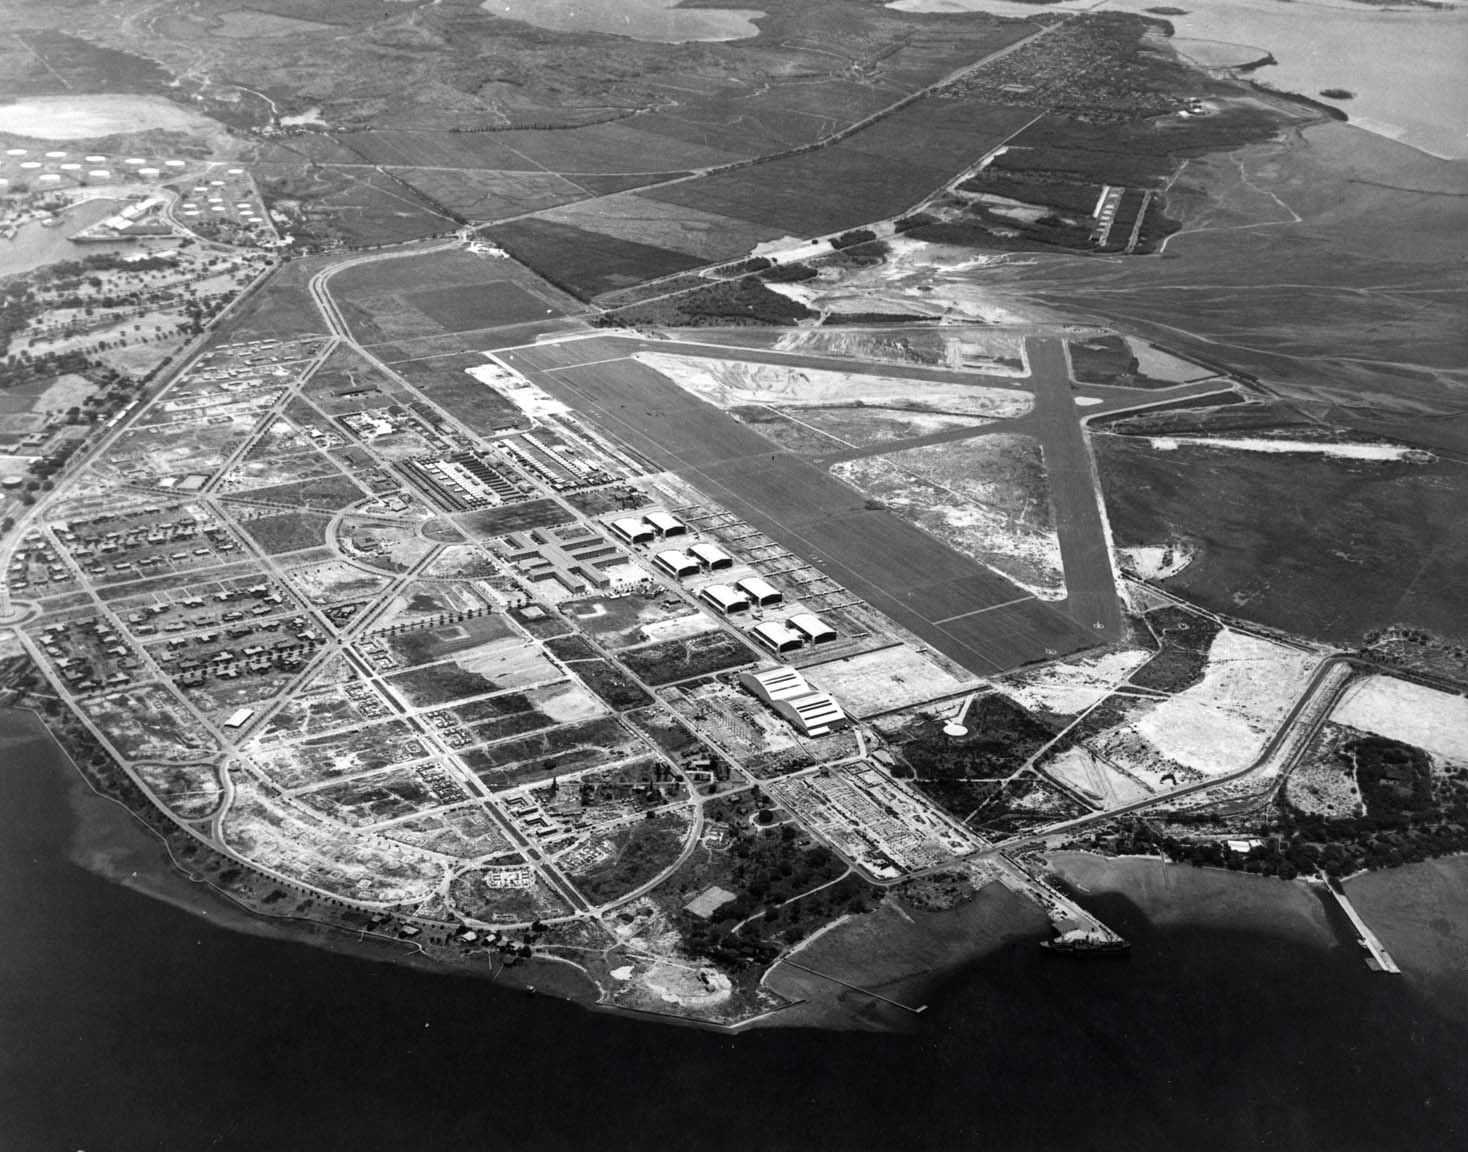 Aerial view of Hickam Field looking toward Honolulu, Hawaii, 3 May 1940. The Pearl Harbor entrance channel is along the bottom of the photo and the Submarine Base can be seen at the upper left.